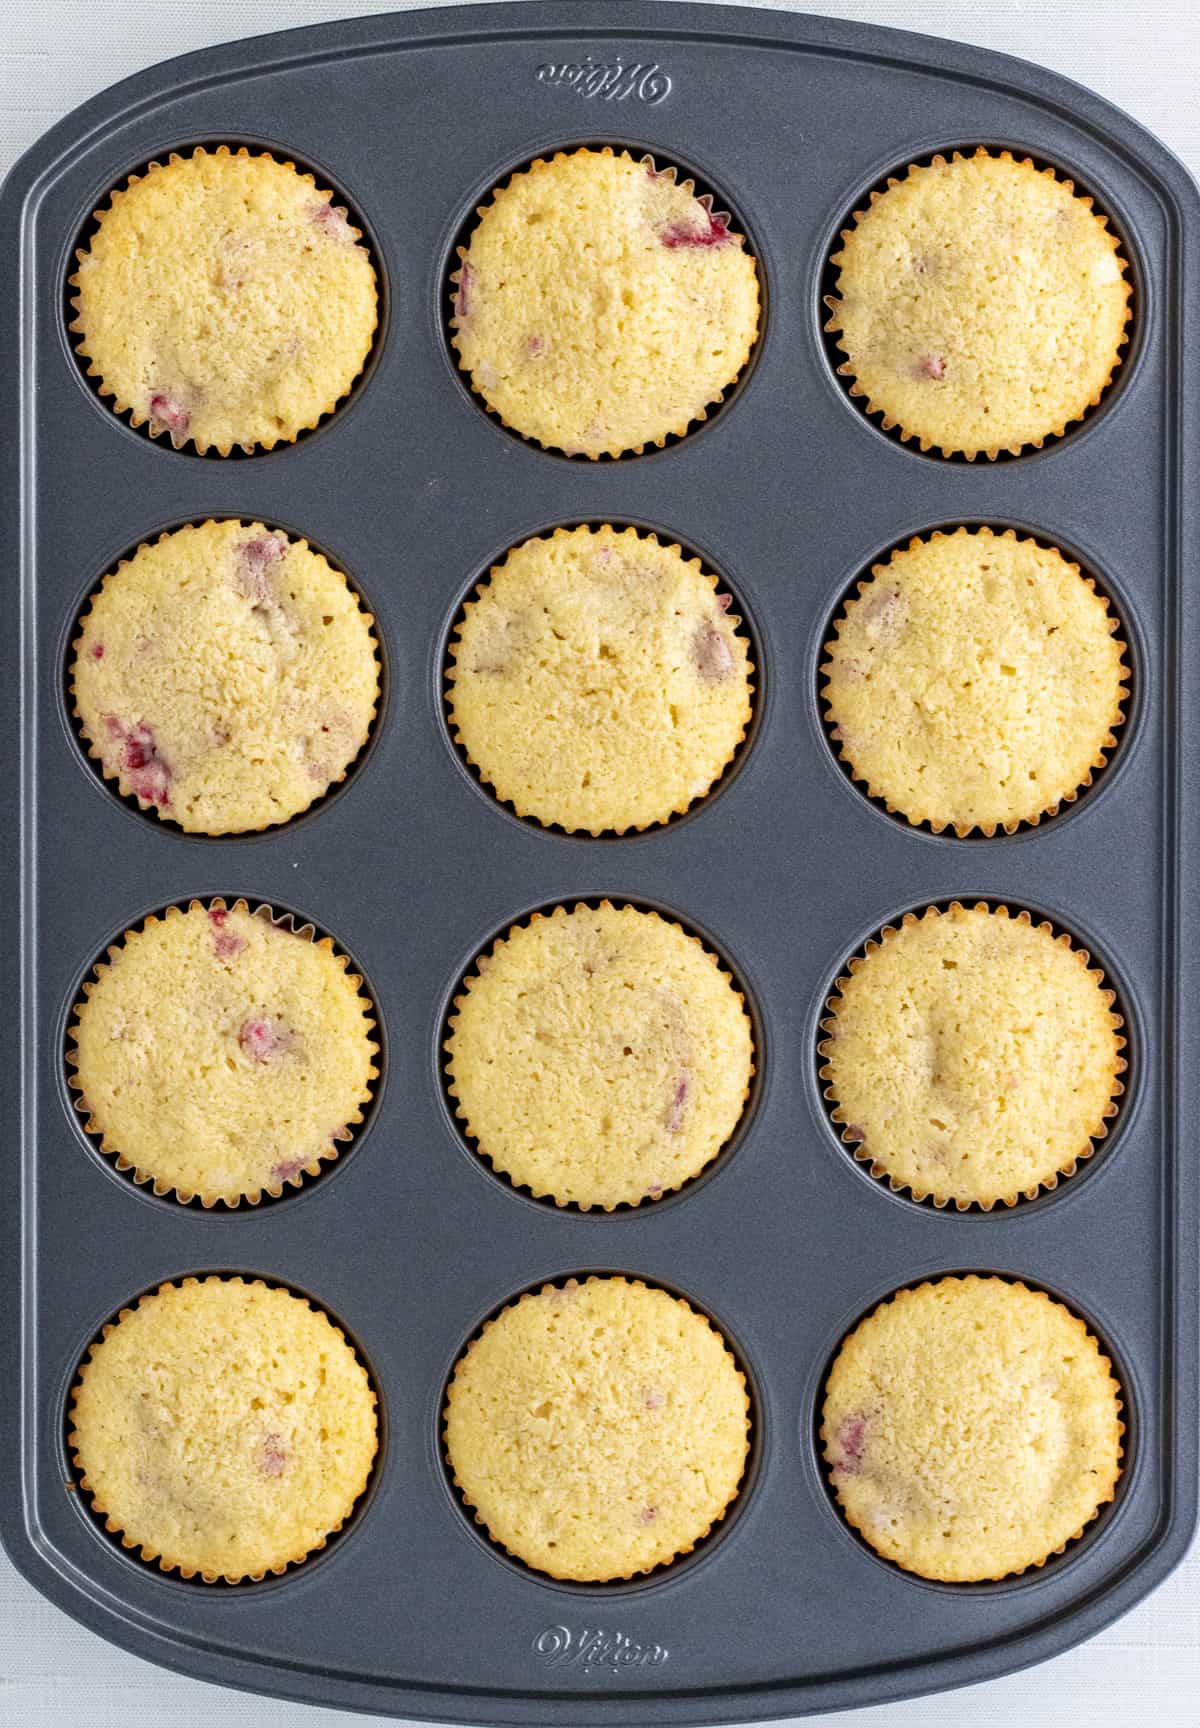 Baked raspberry cupcakes in the cupcake pan.